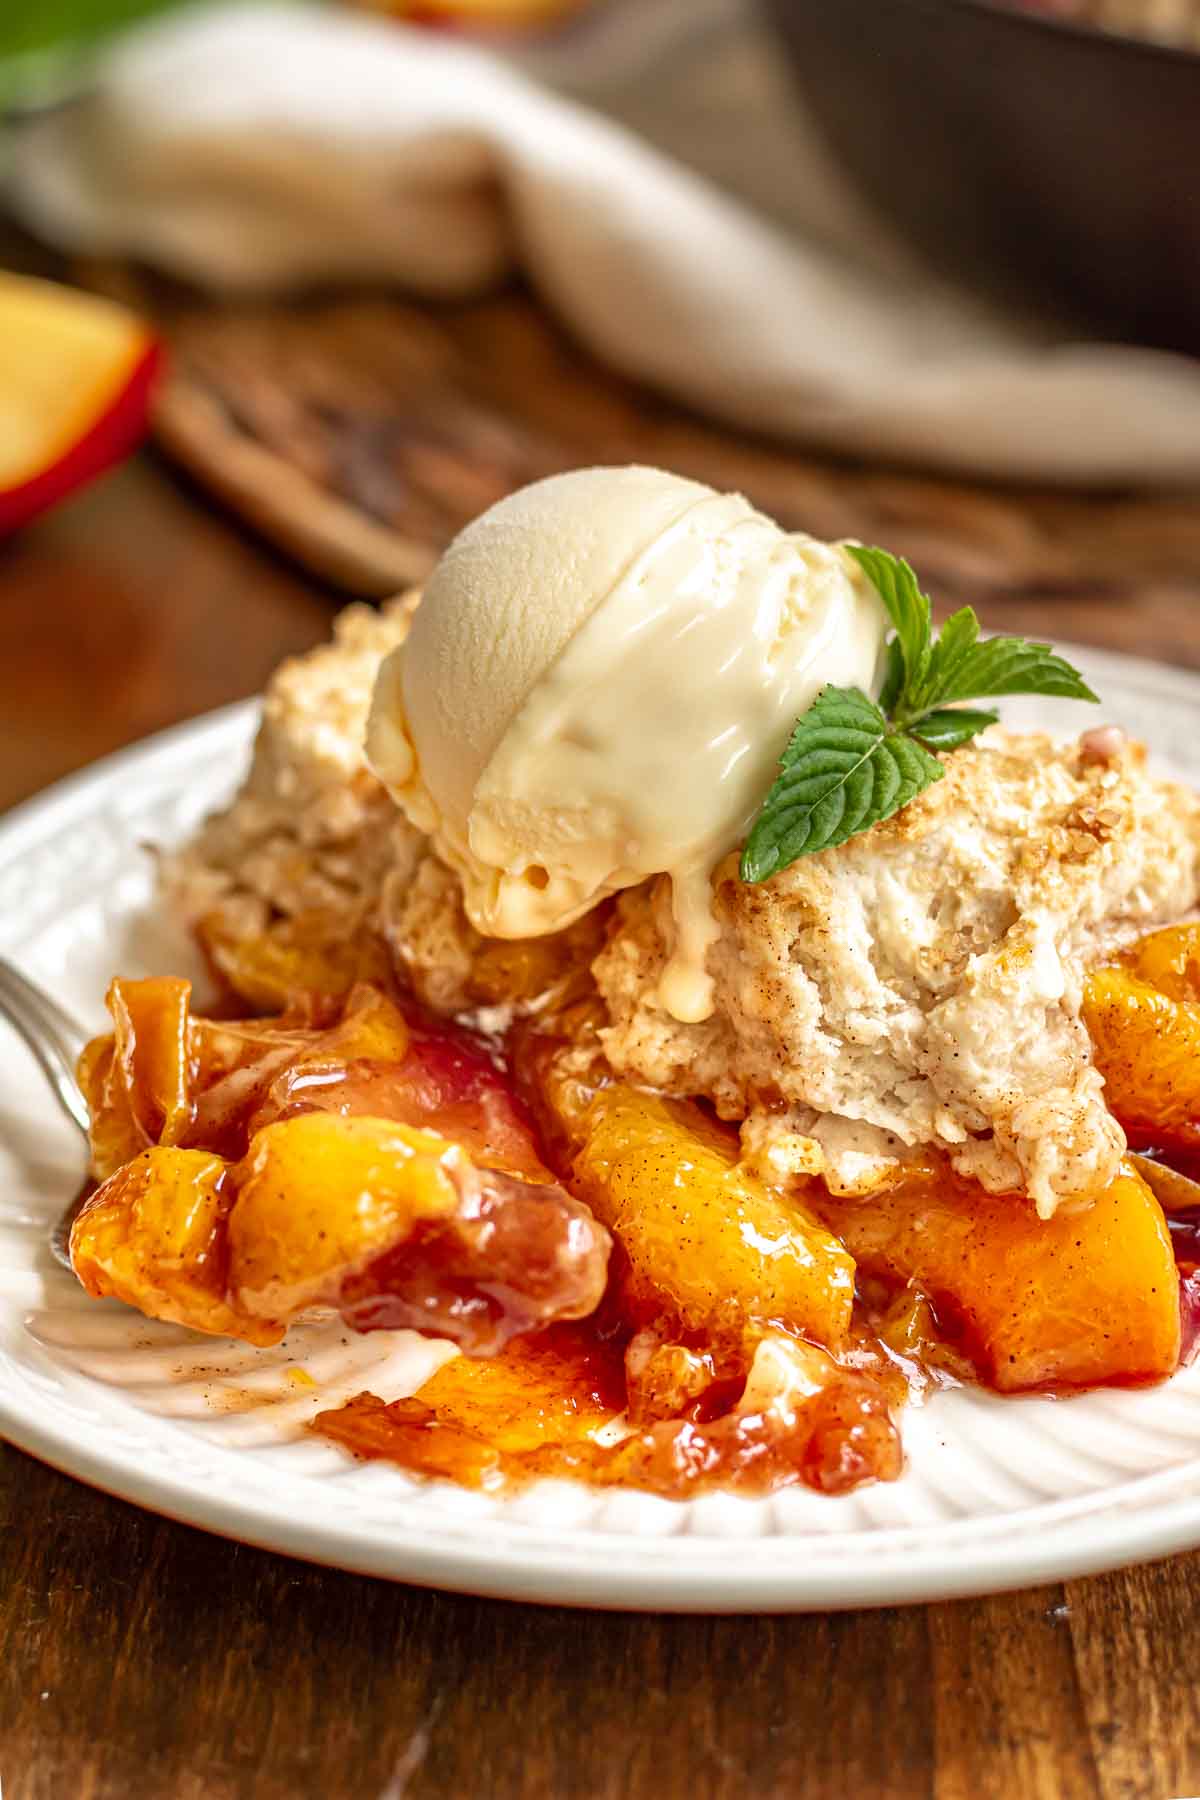 A plate with served peach cobbler topped with ice cream.